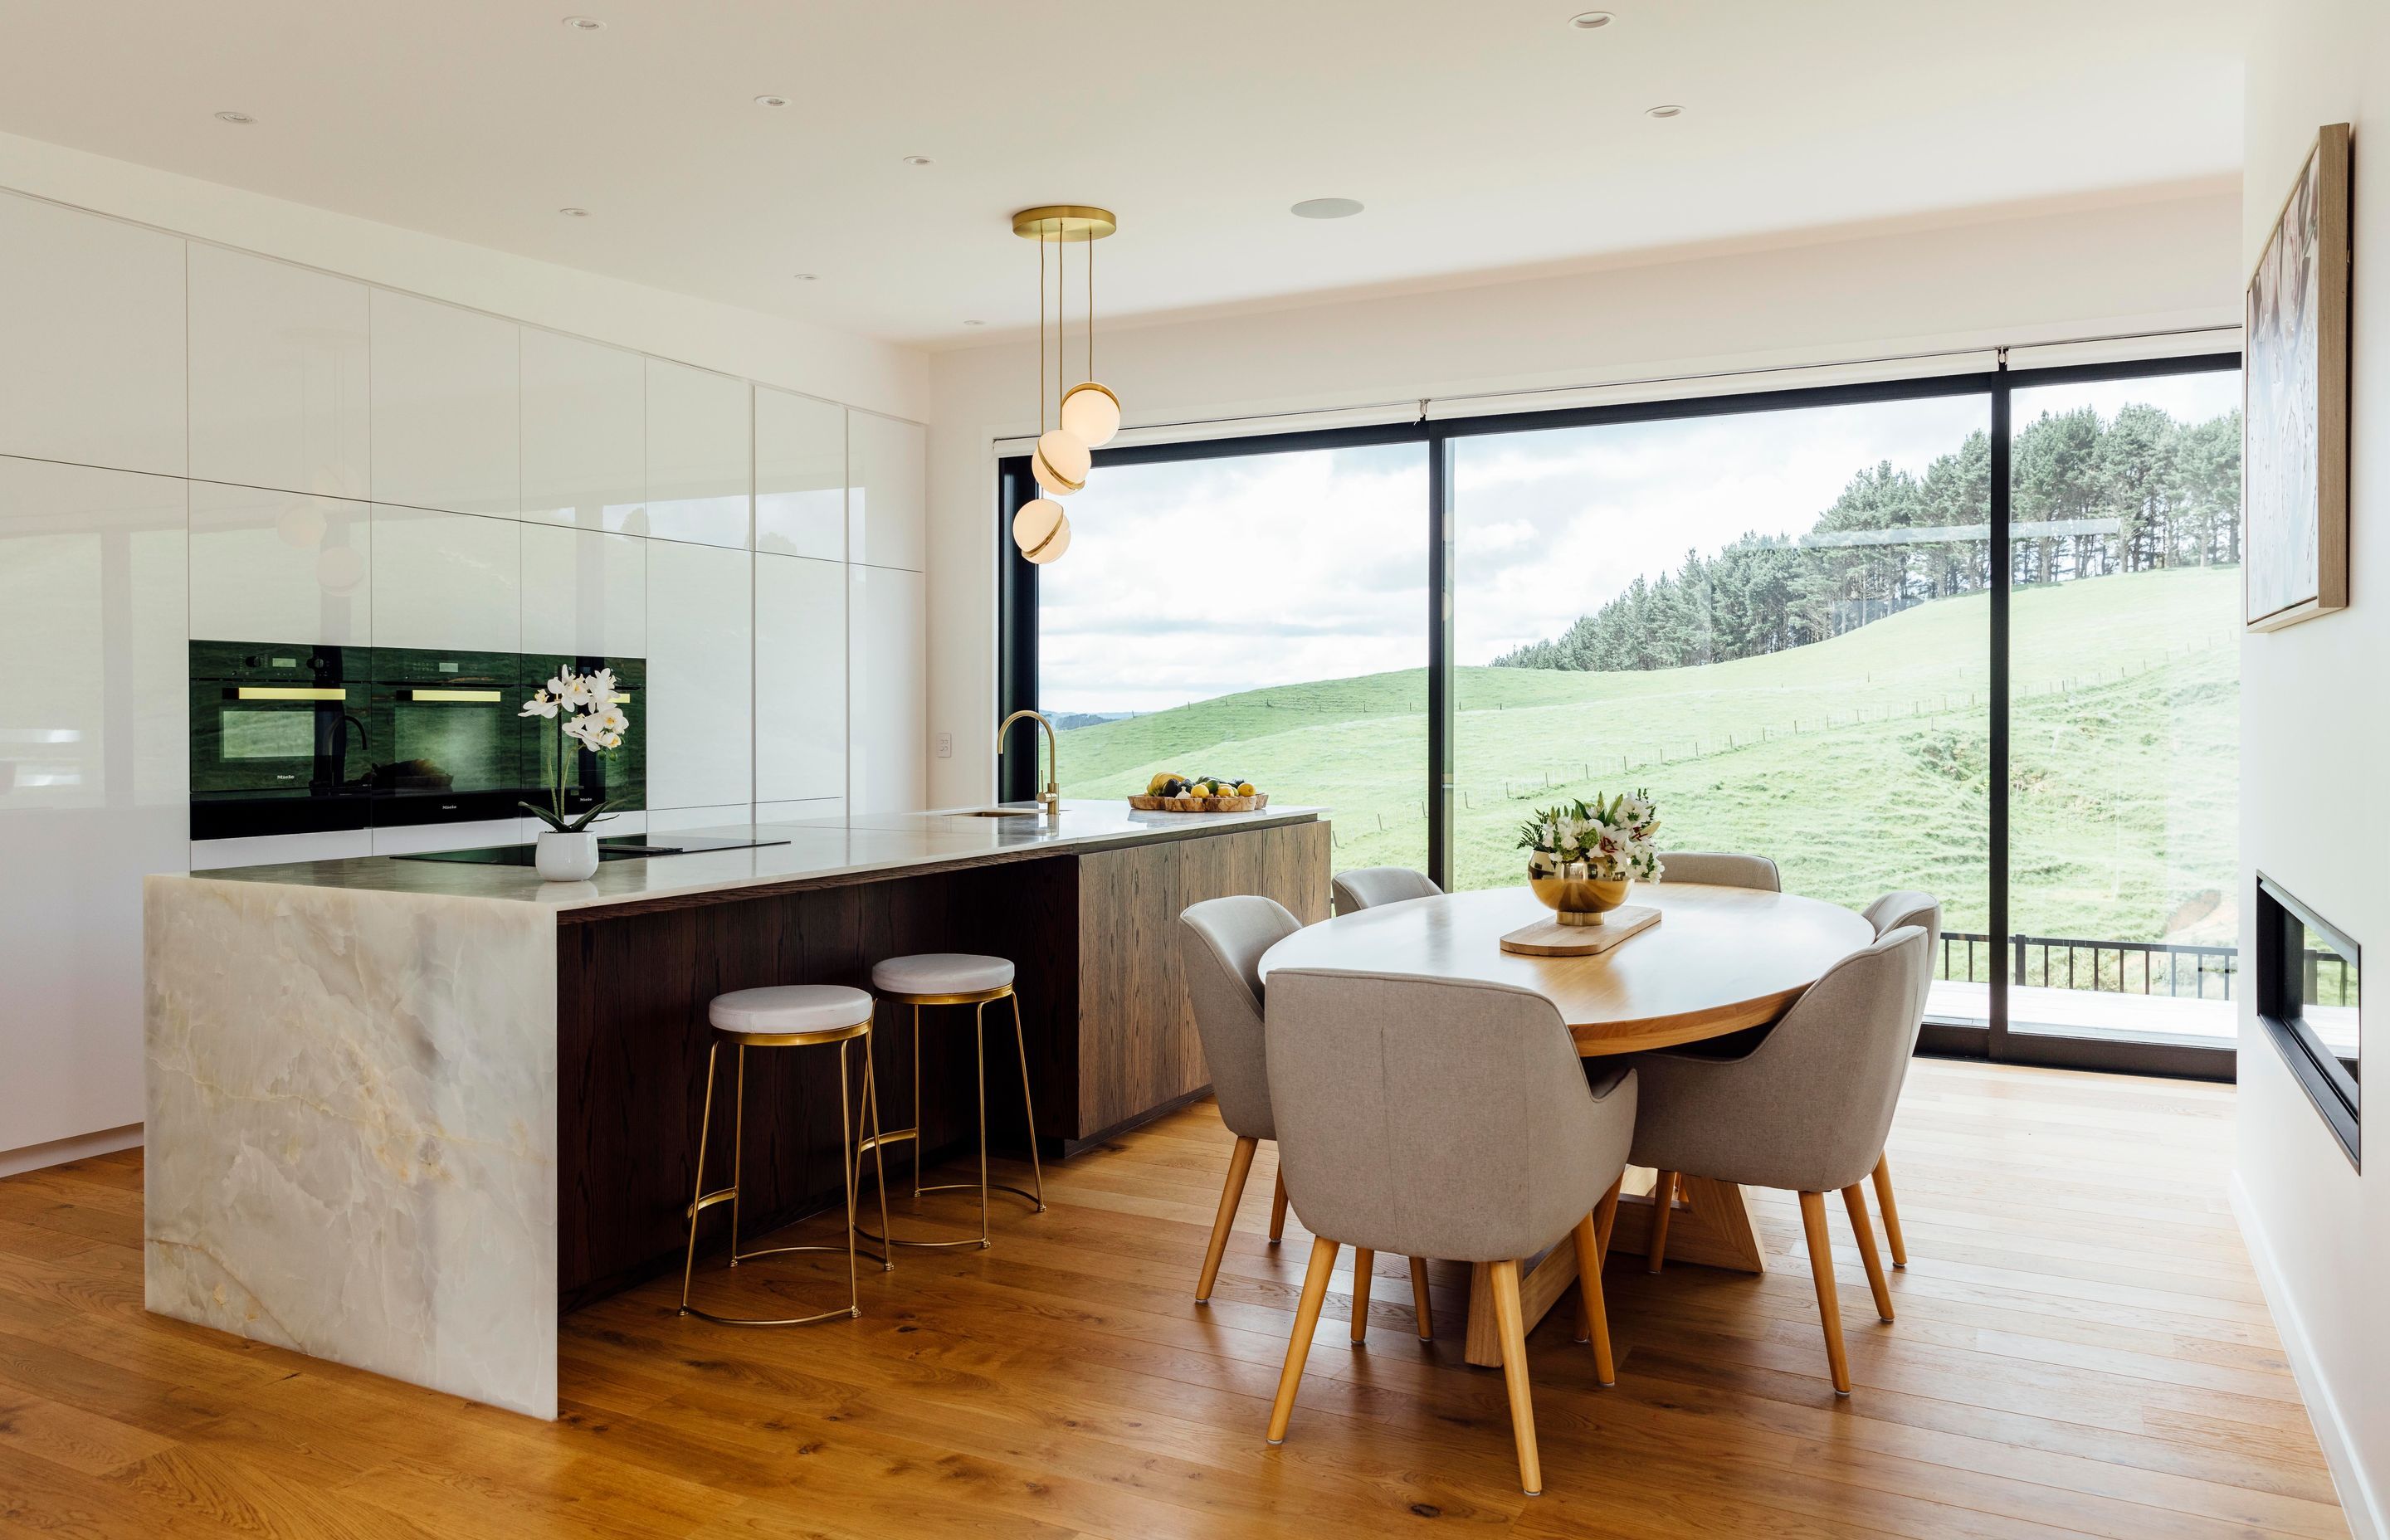 The kitchen, designed by Leonie Hamill from Cube Dentro, has glossy white cabinetry, a benchtop of white Iranian onyx and a Phoenix Vivid Slimline sink mixer. A Lee Broom mini crescent chandelier is the final touch.